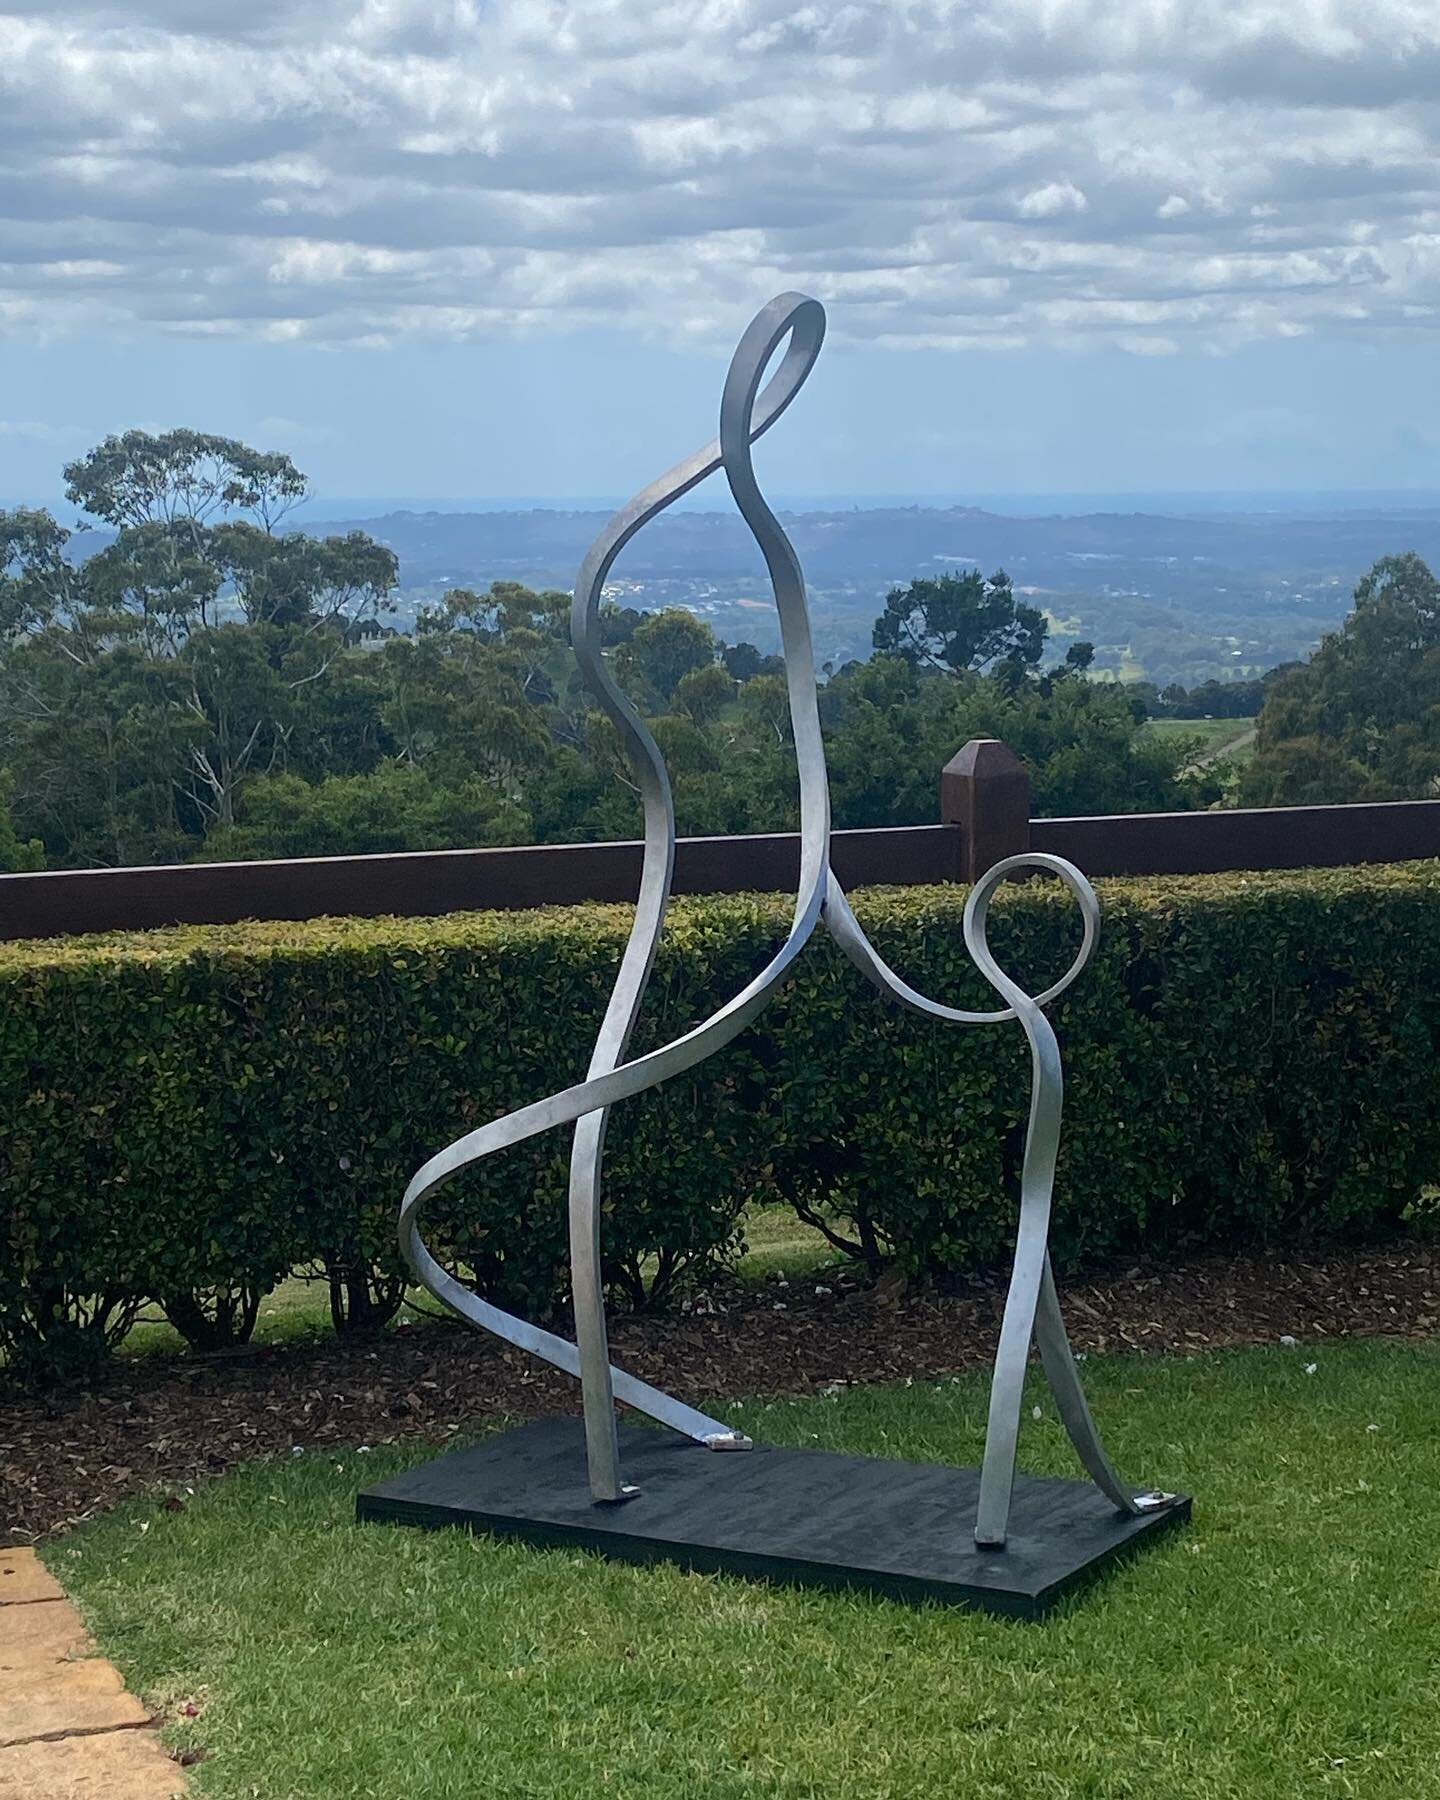 My sculpture Walk in the park now on view at sculpture on the edge at Flaxton 
#sculptureontheedge 
#australiansculpture #australiansculptors 
#woodsculpture #woodsculptures